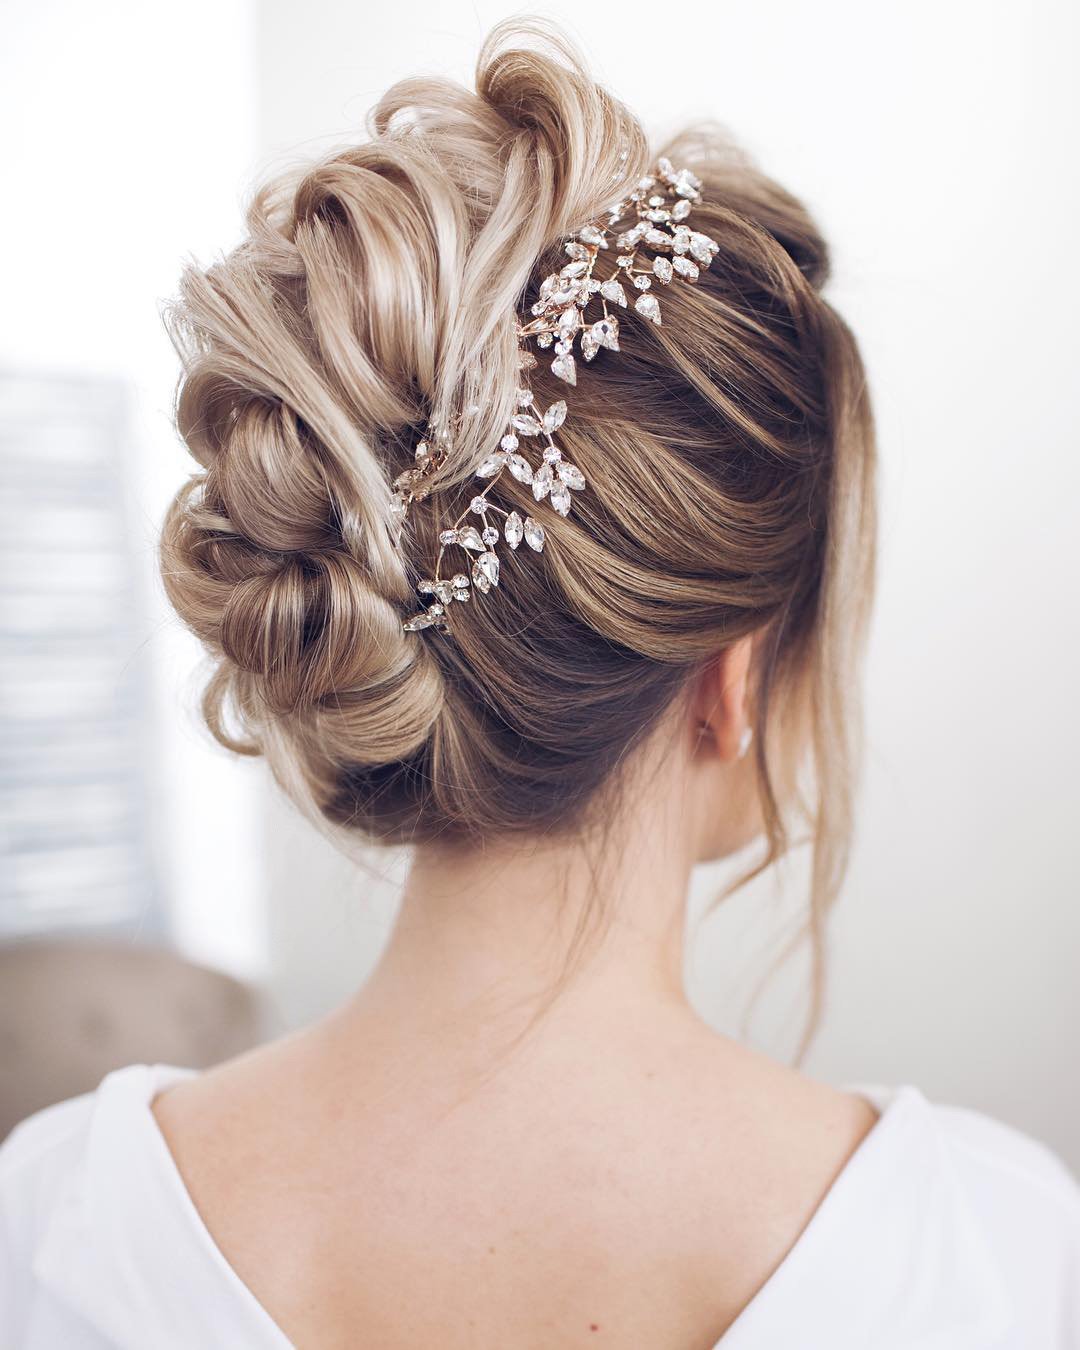 Bride with Textured Updo